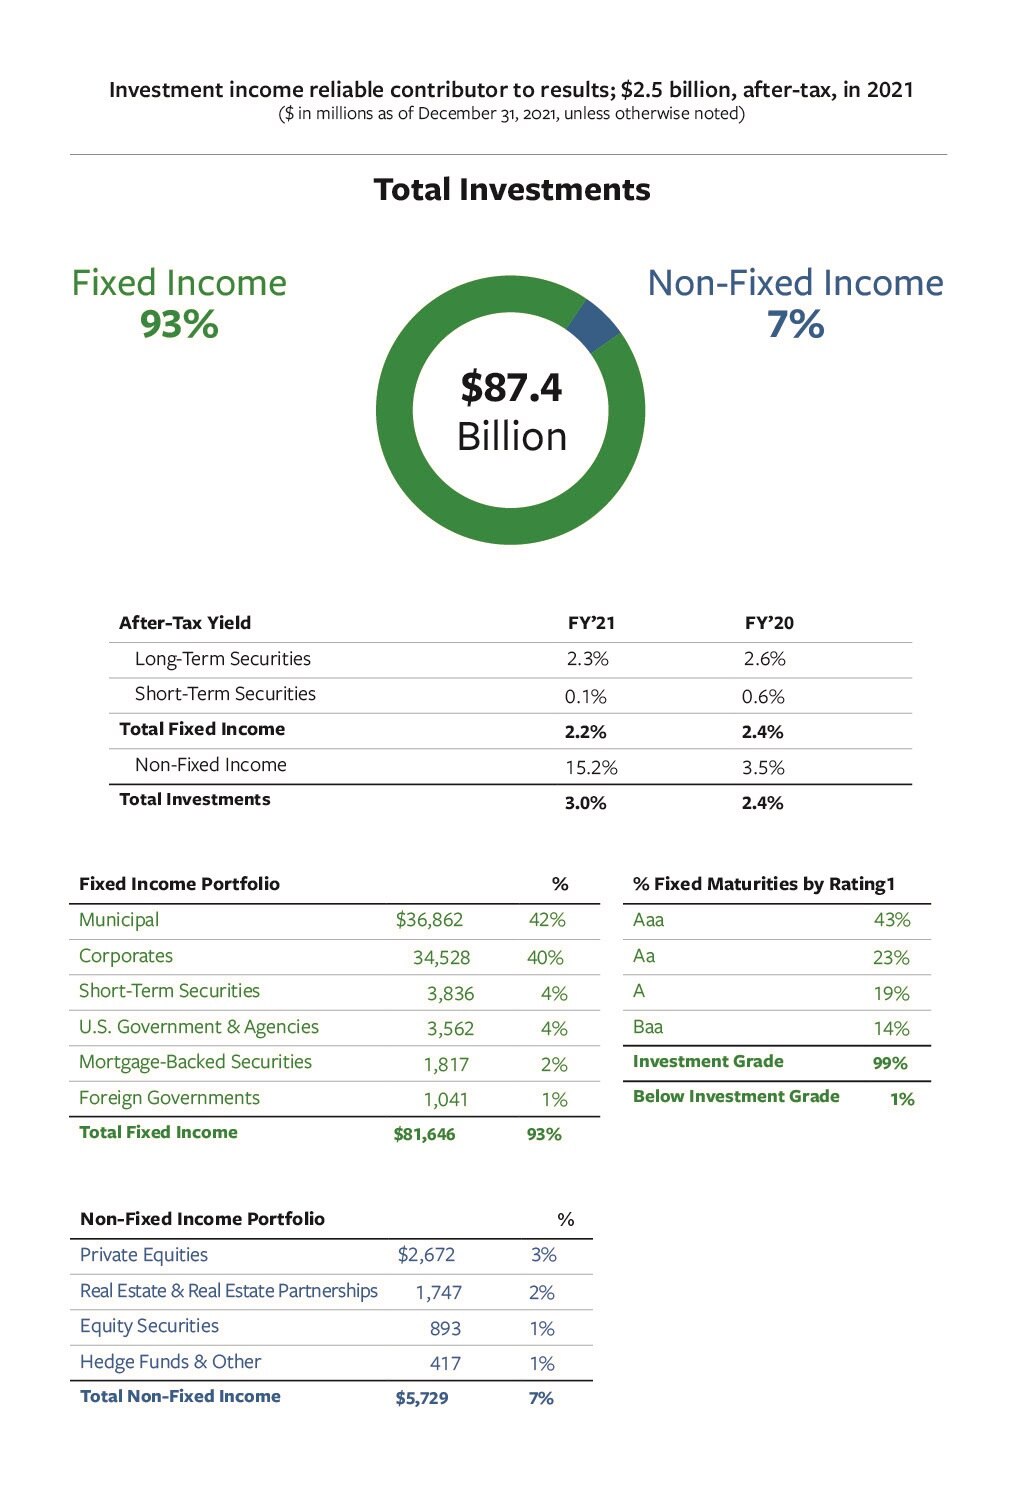 Investment Income reliable contributor to results; $2.5 billion, after-tax, in 2021, see details below.